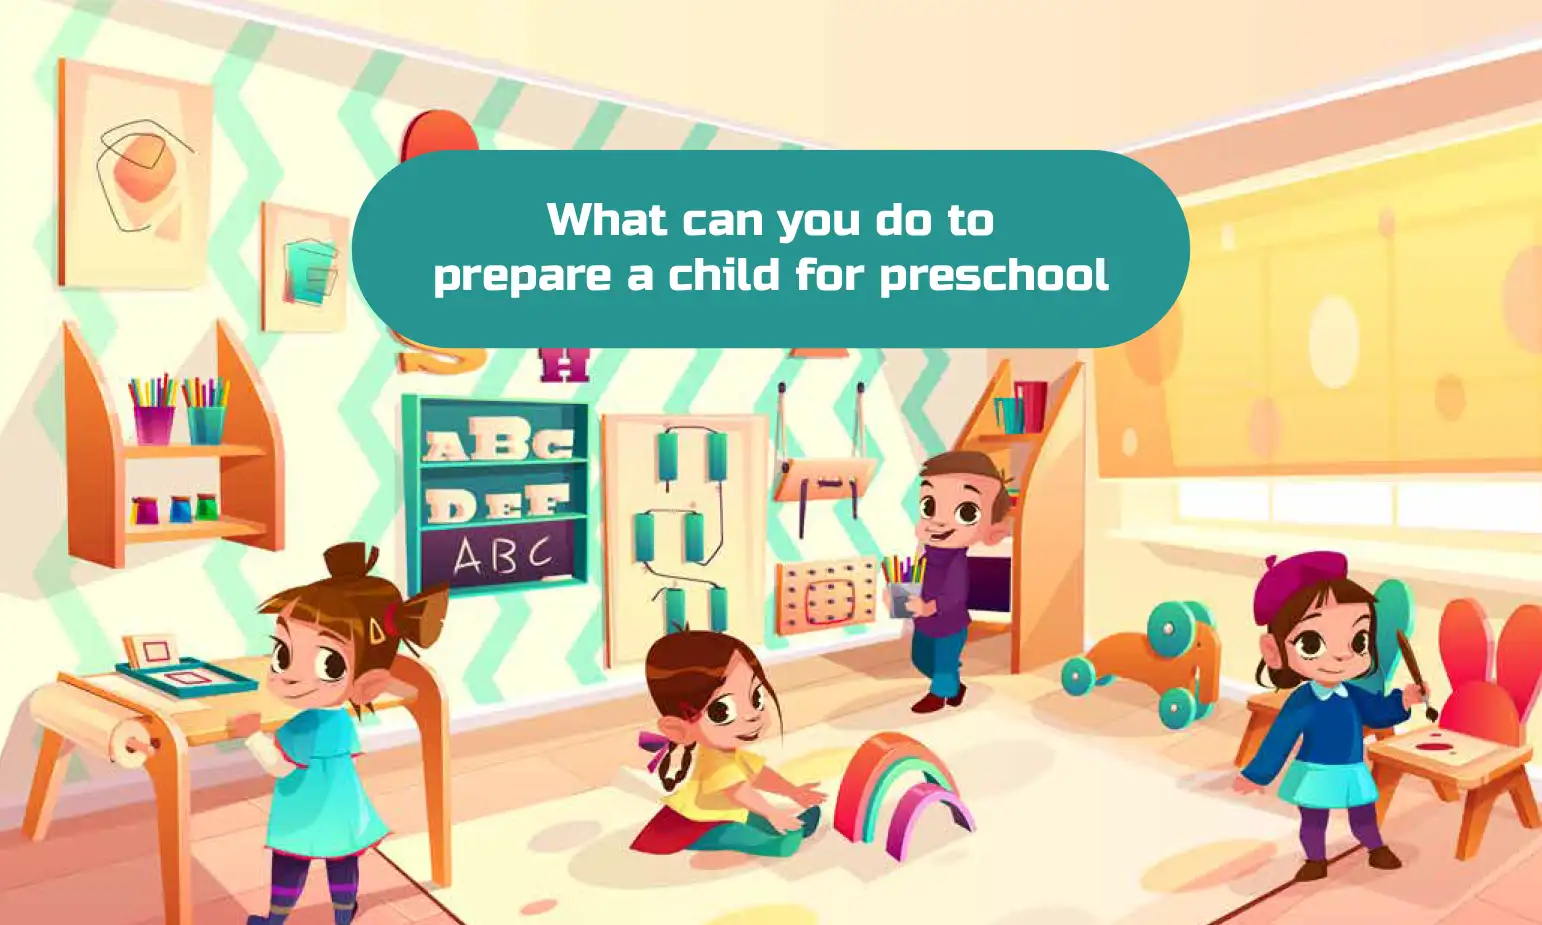 What Can You do to Prepare a Child for Preschool?